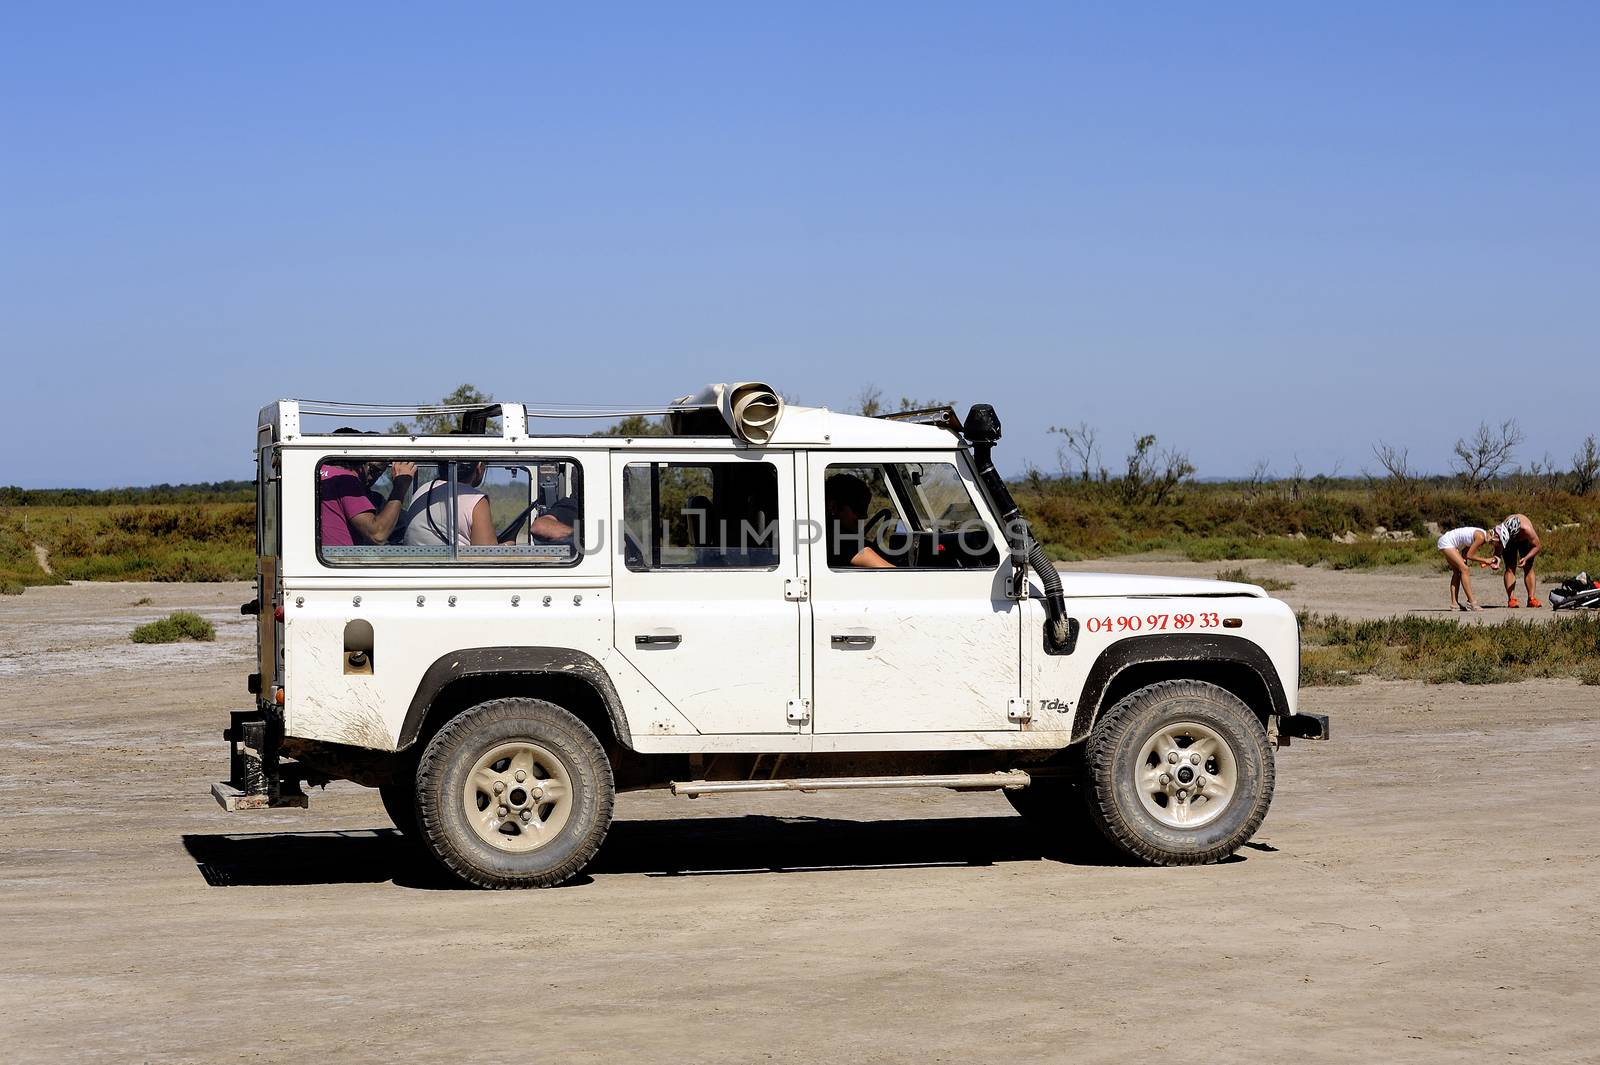 Tourists visiting the Camargue 4x4 with a guide to explain the area and wildlife such as flamingos.